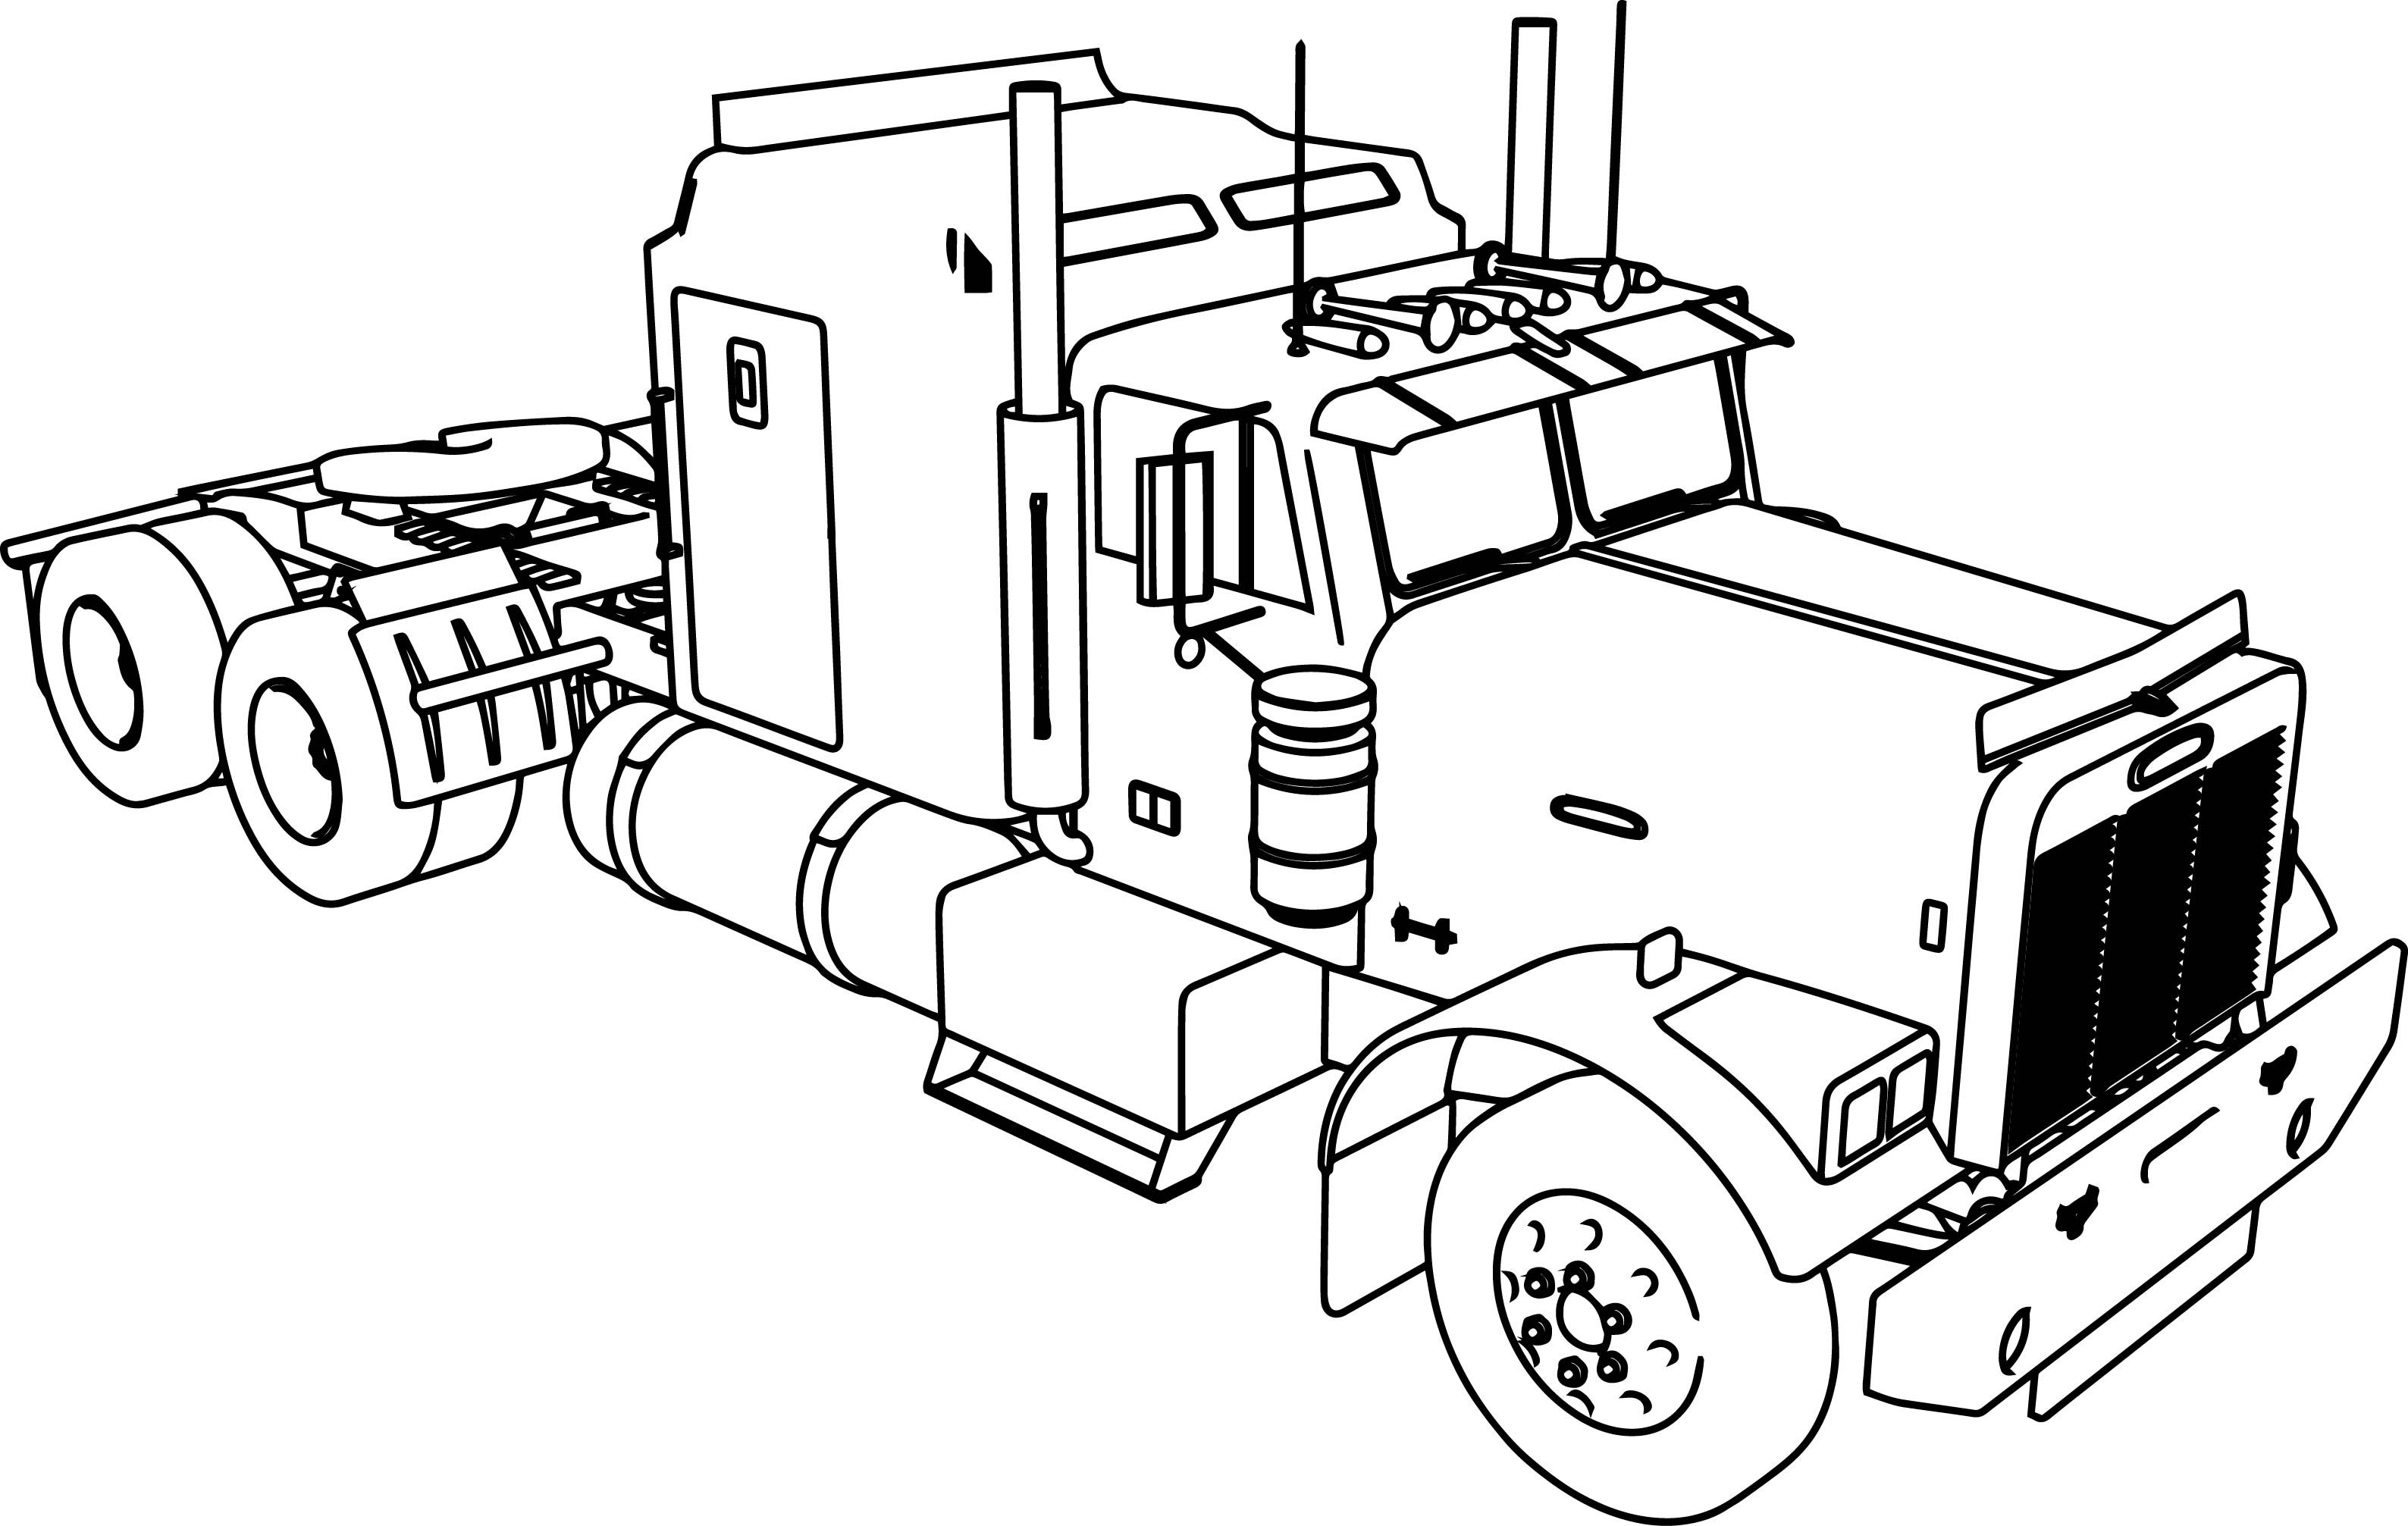 Chevy Silverado Coloring Pages at GetDrawings.com | Free for ...